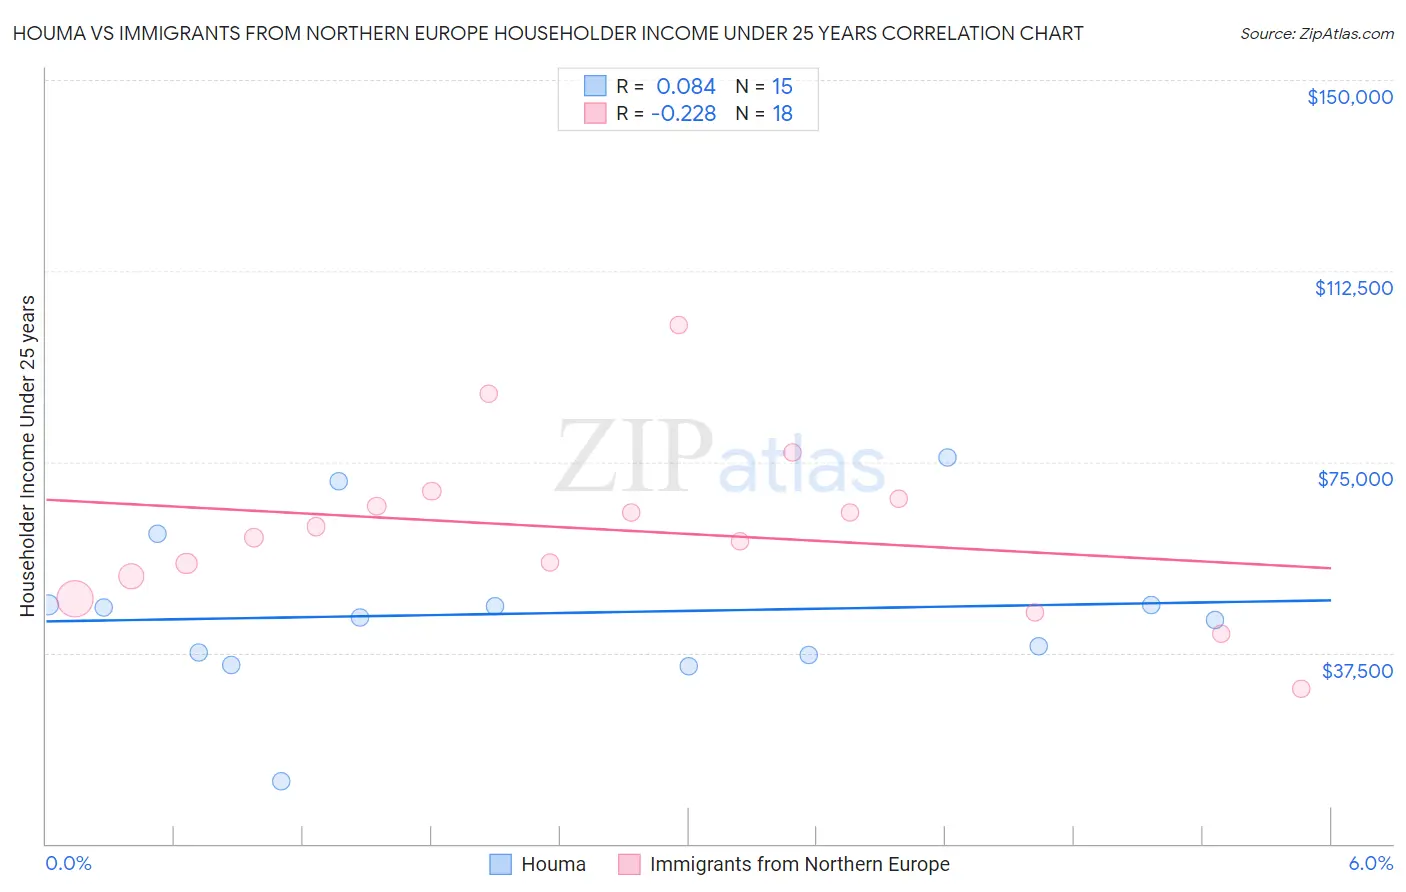 Houma vs Immigrants from Northern Europe Householder Income Under 25 years